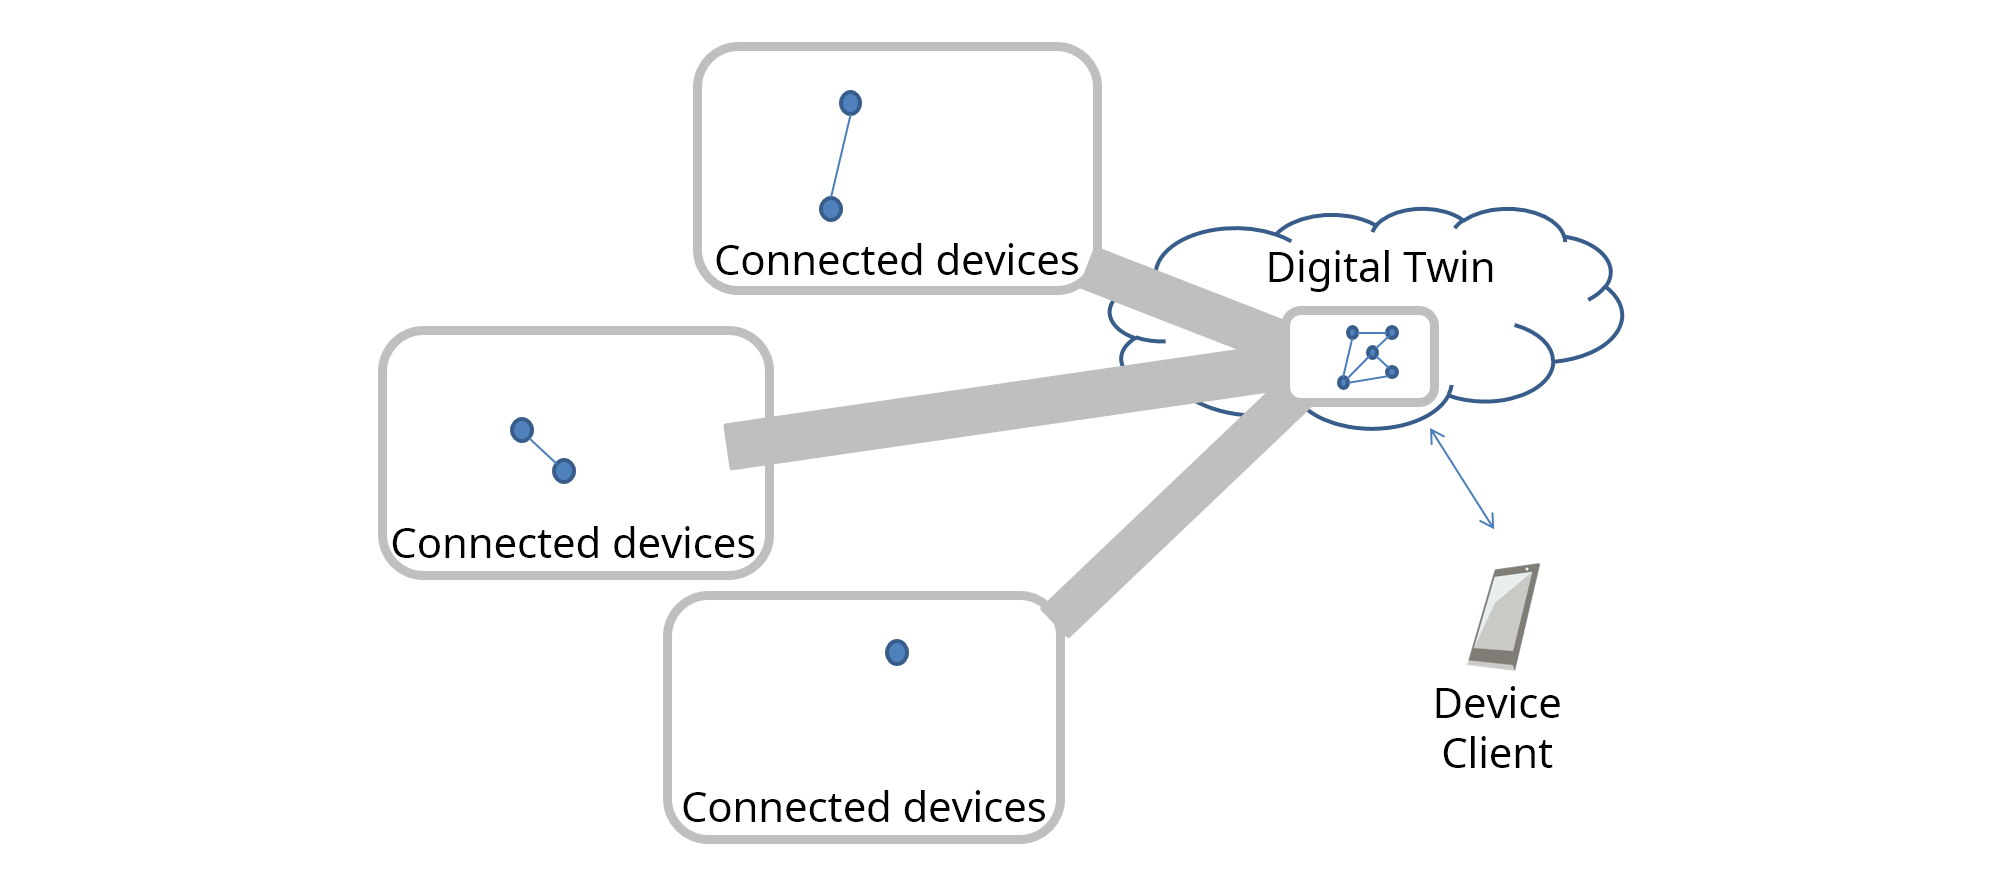 digital twin multiple devices use case